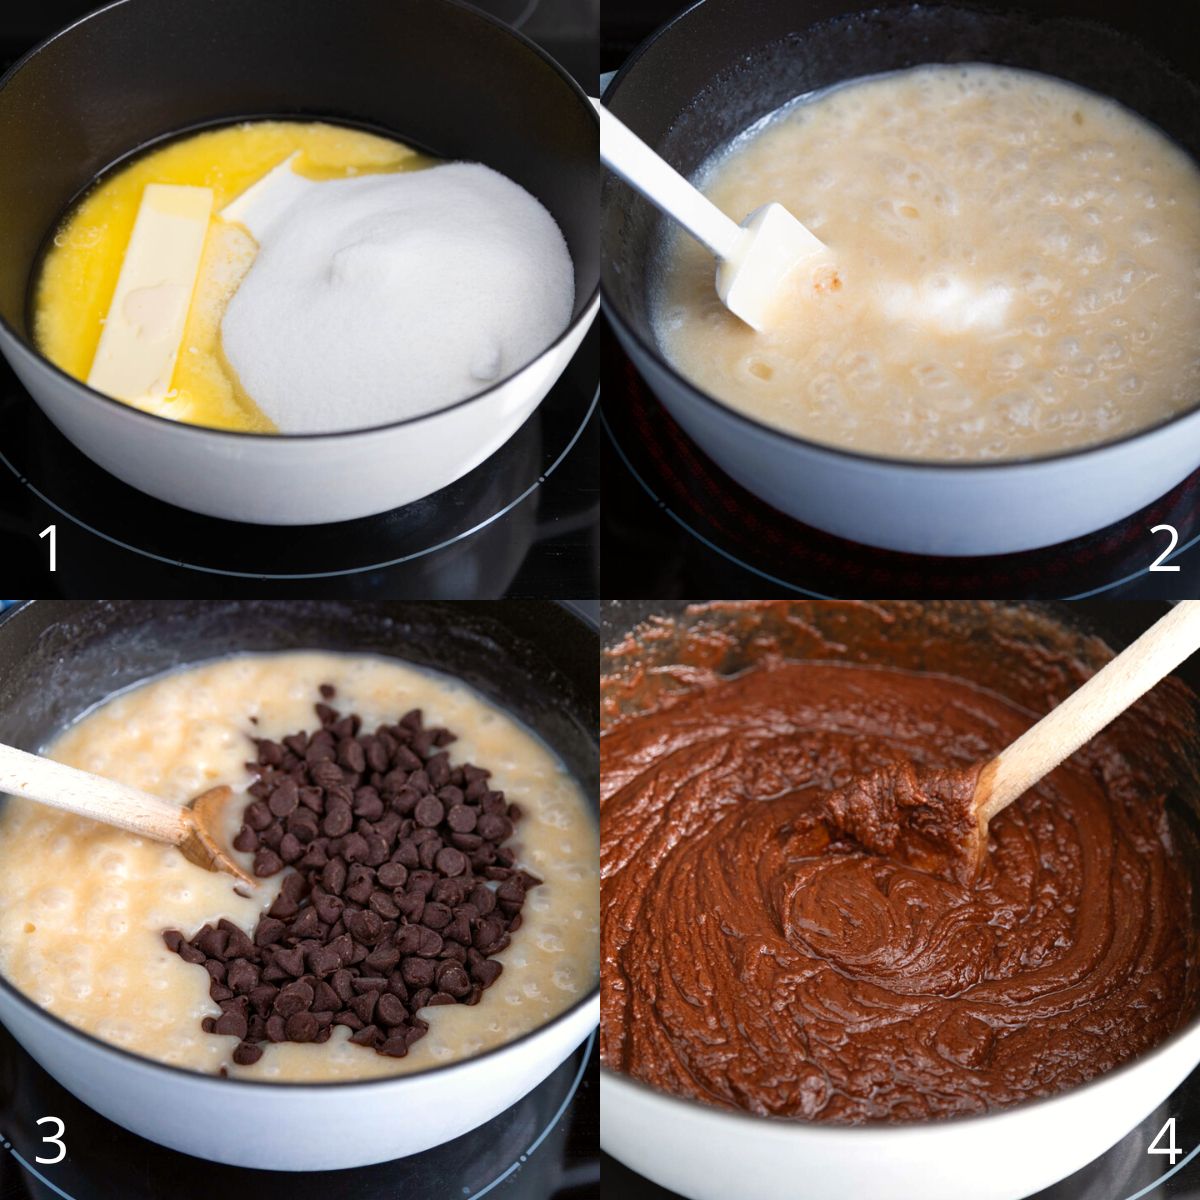 The step by step photos show the fudge being cooked in a large pot on the stovetop.